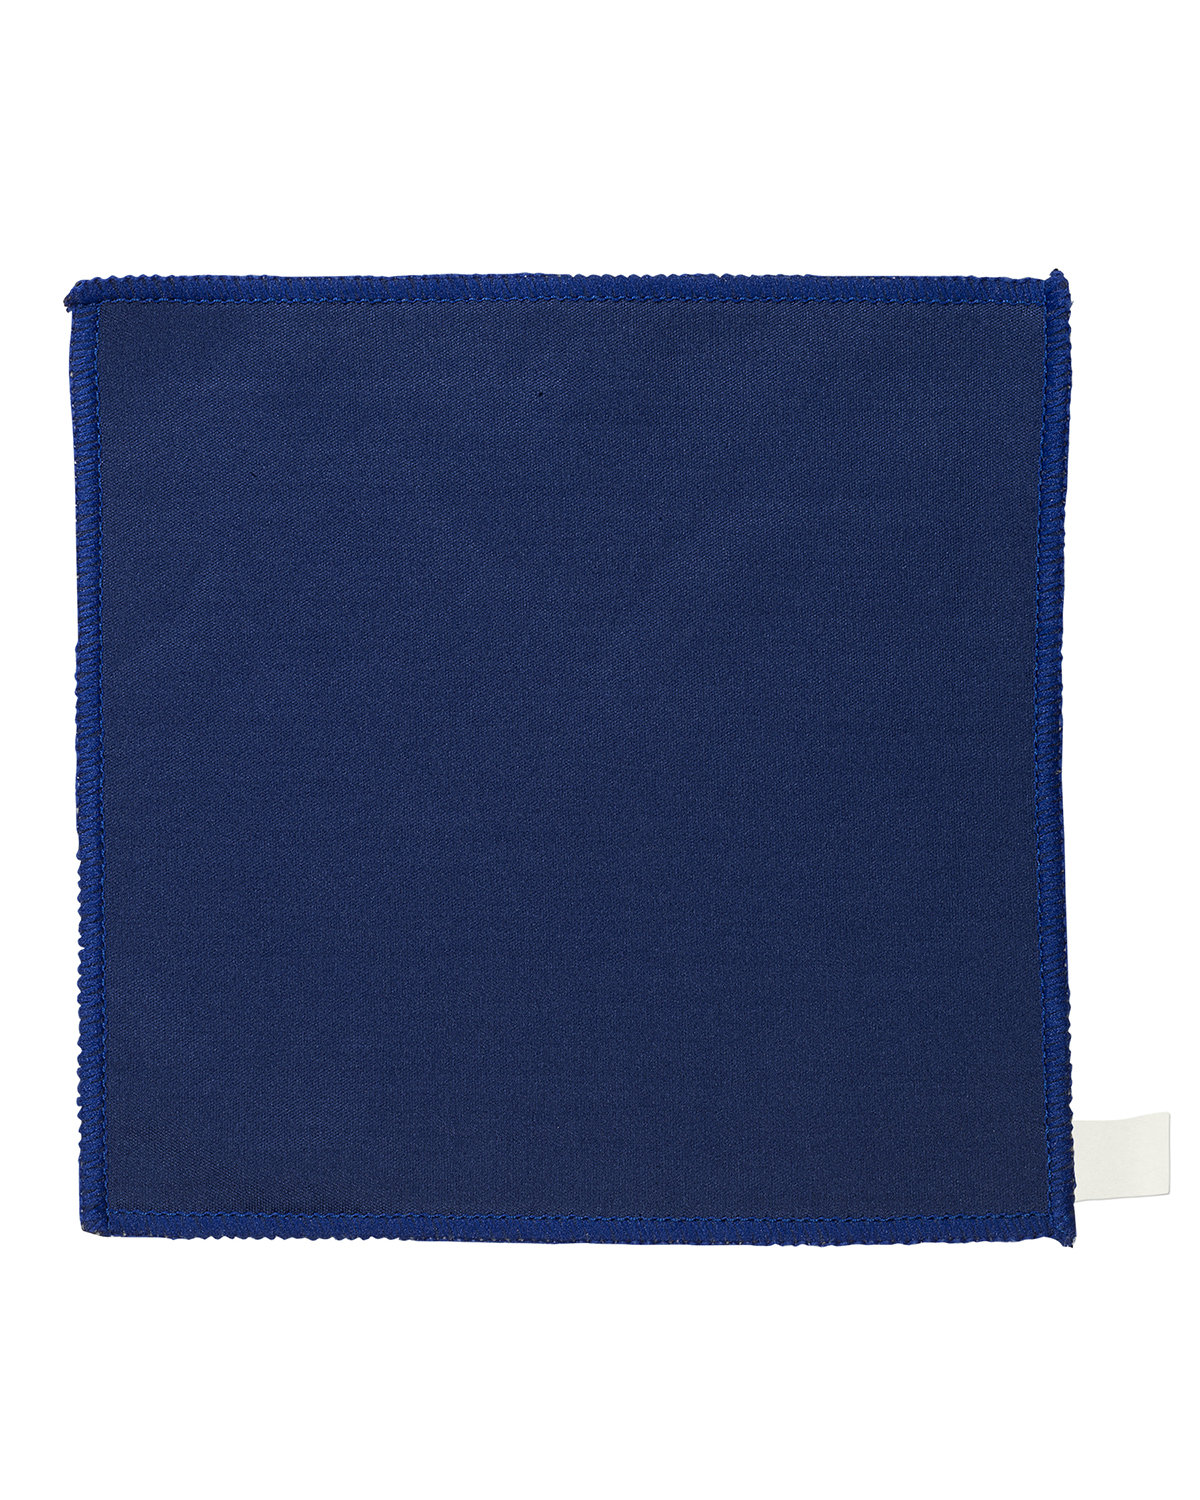 Prime Line Double-Sided Microfiber Cleaning Cloth navy blue 